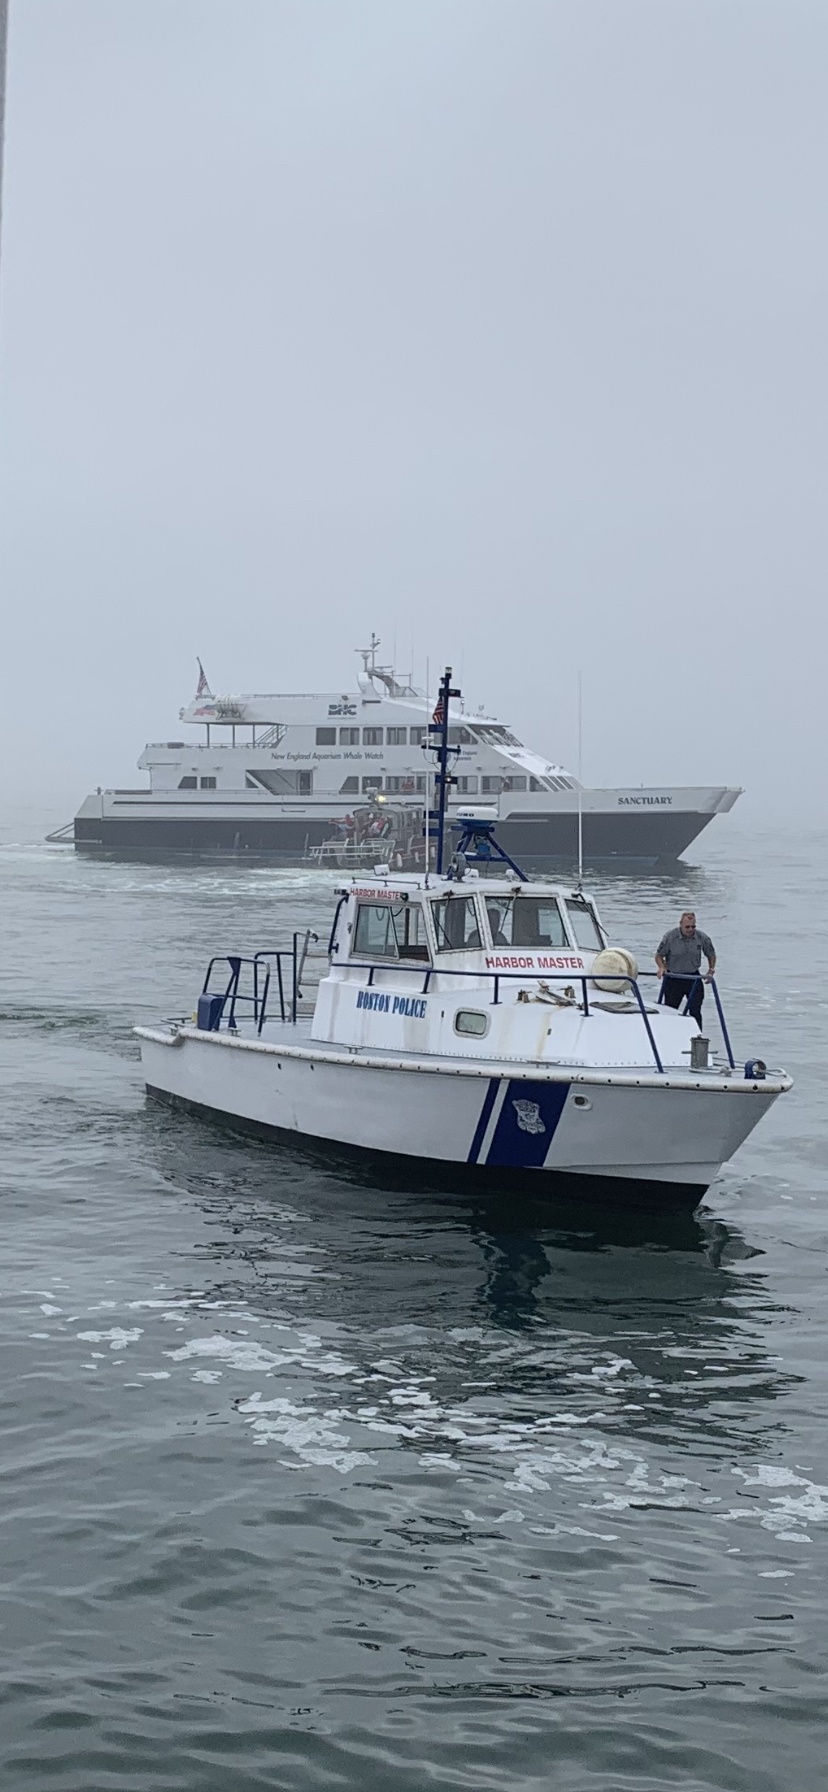 Coast Guard, state, local agencies respond to ferry grounding in Boston Harbor